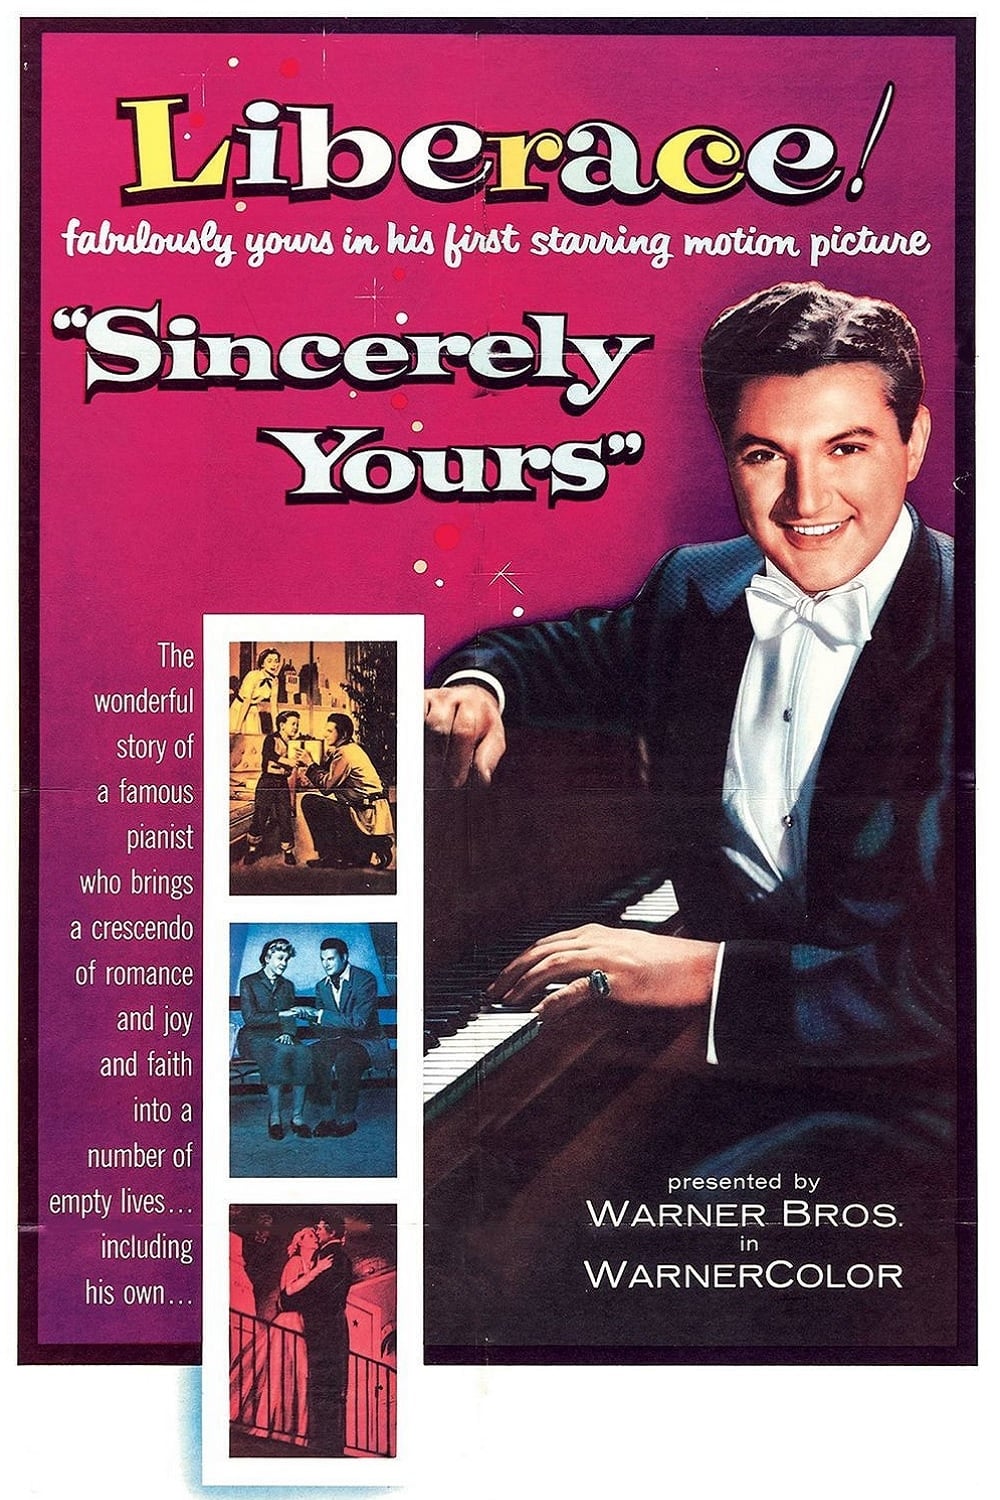 Sincerely Yours (1955)